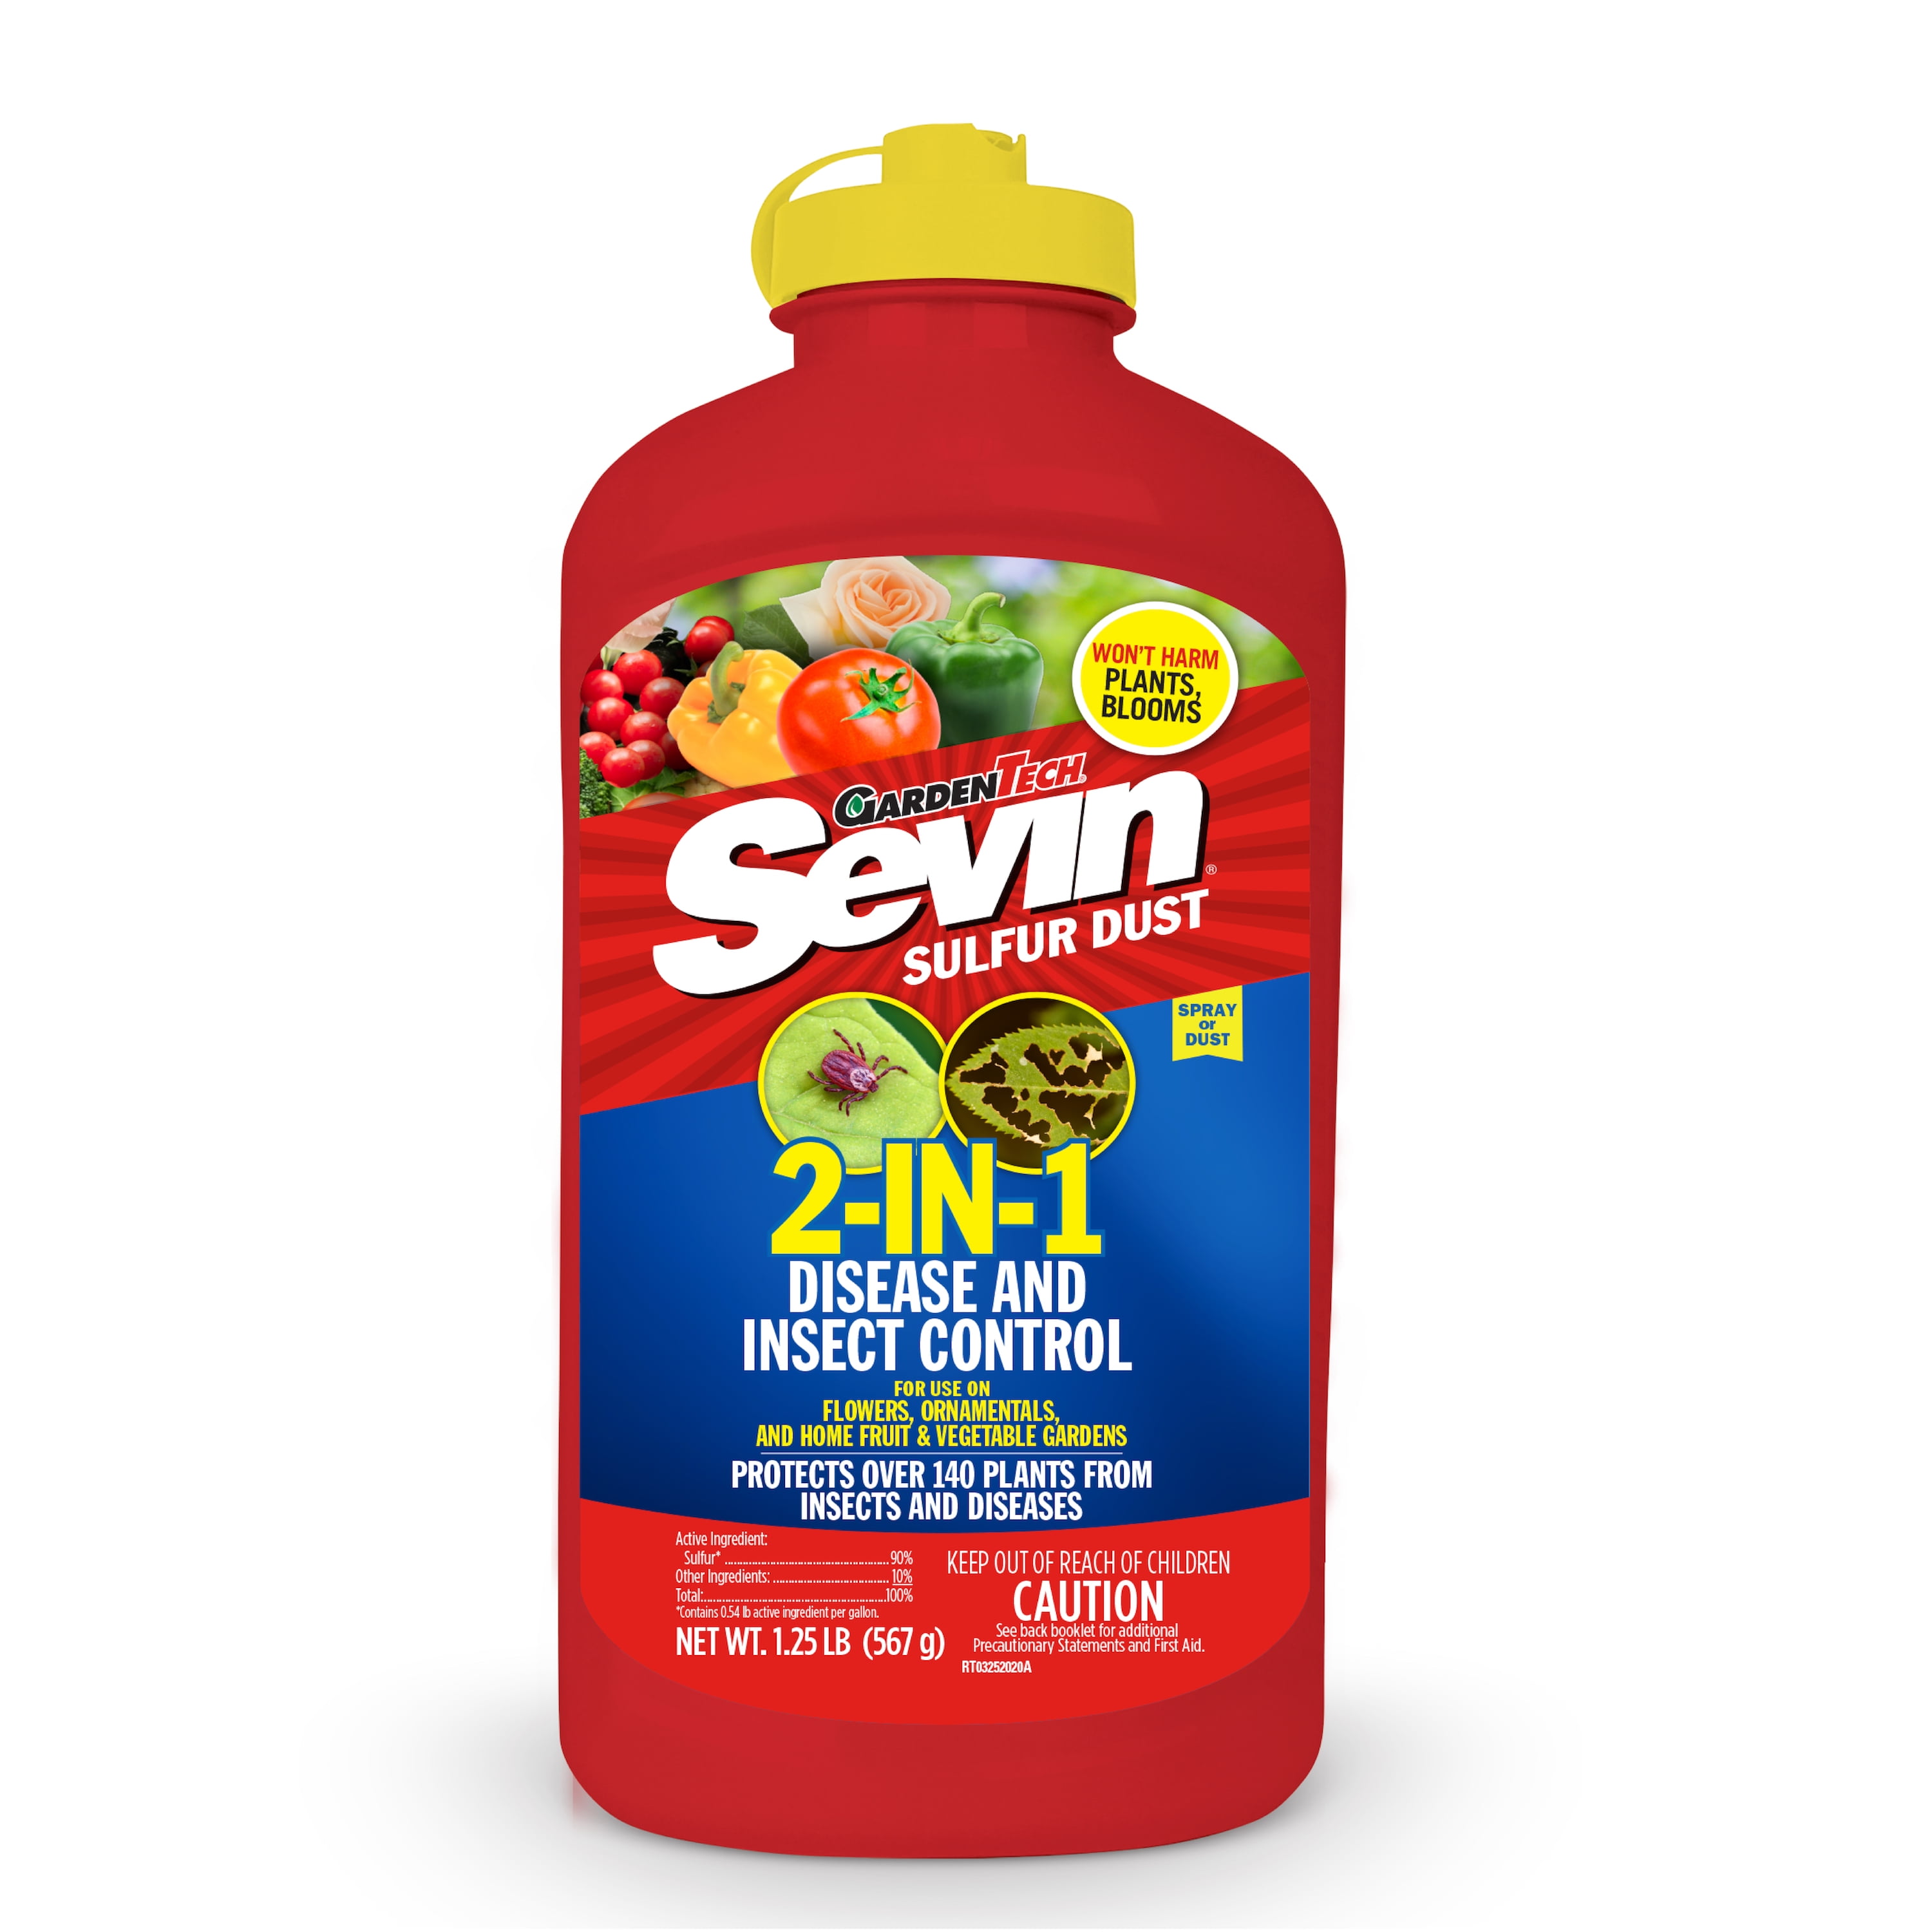 Sevin Sulfur Dust 2 In 1 Disease And Insect Control 125 Lb - Walmartcom